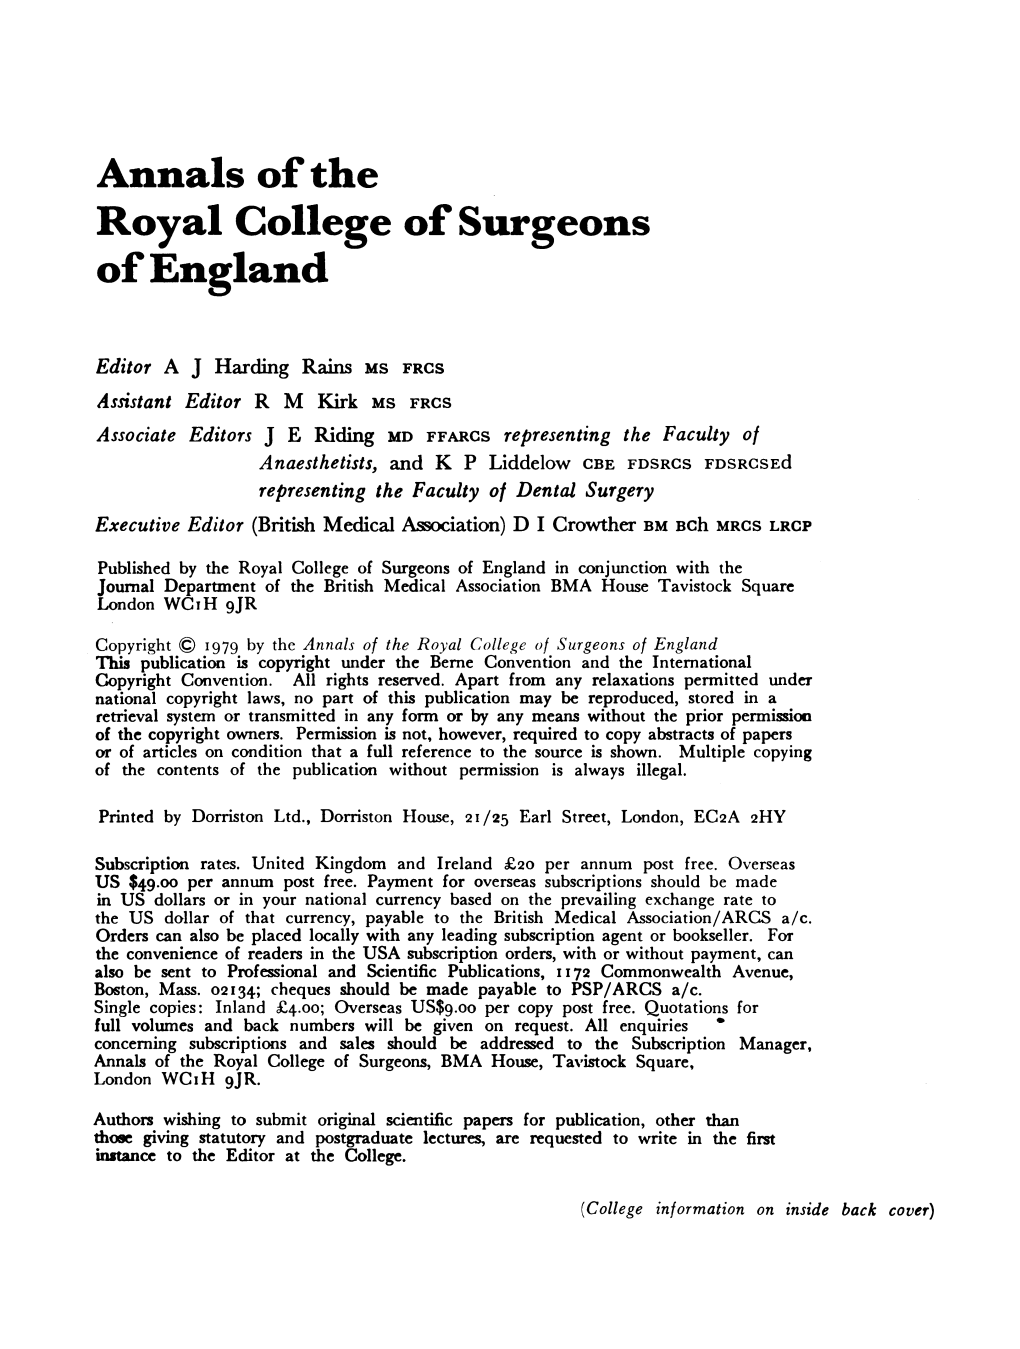 Annals Ofthe Royal College of Surgeons Ofengland